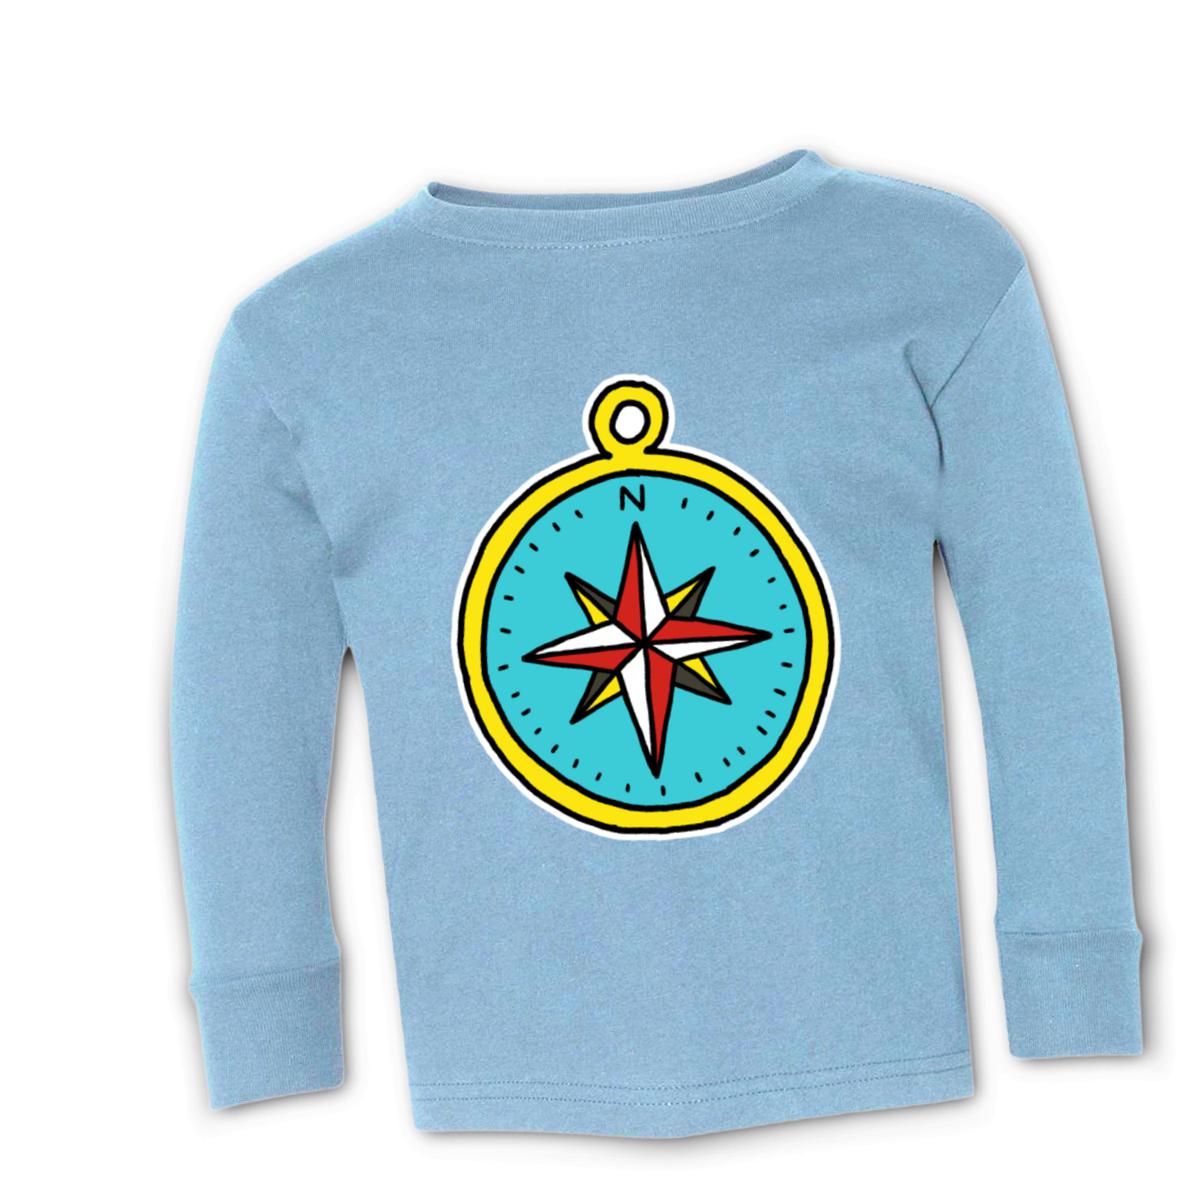 American Traditional Compass Kid's Long Sleeve Tee Small light-blue